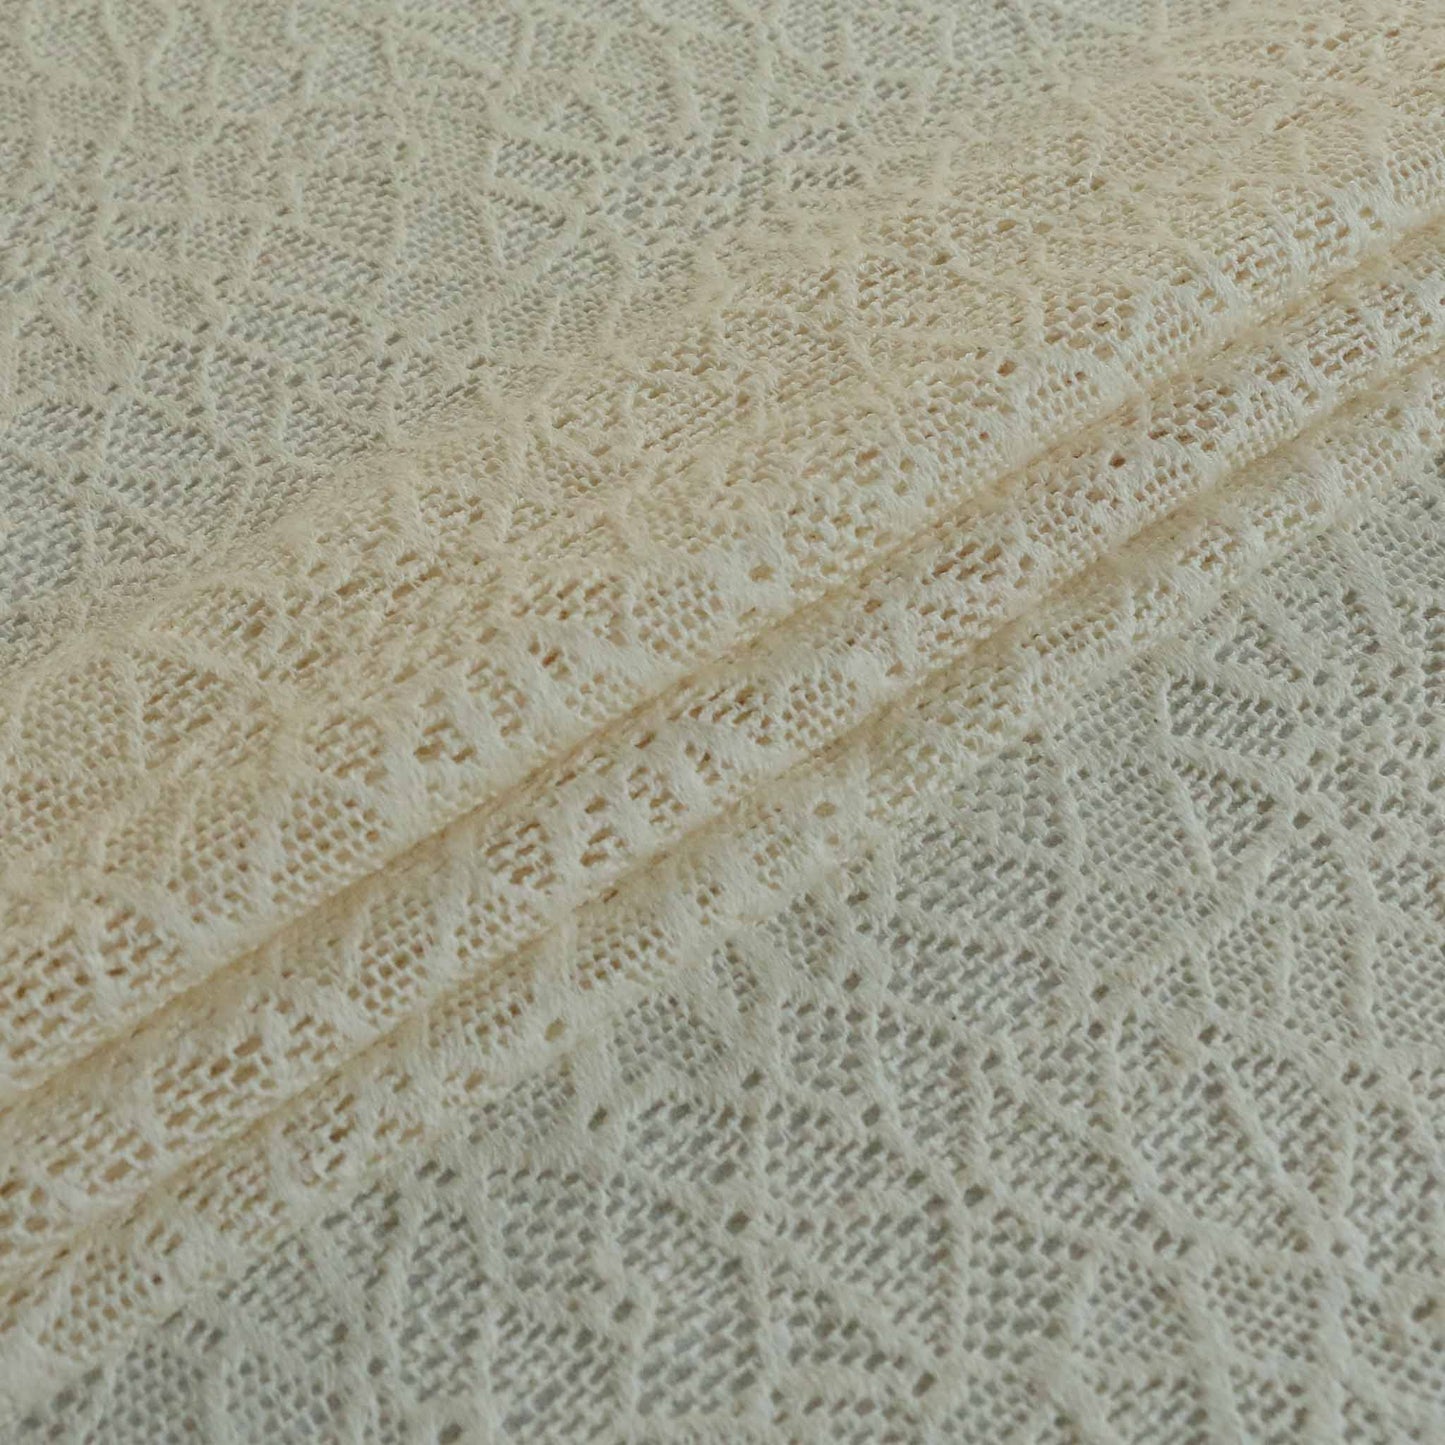 cream lace embroidery dressmaking fabric